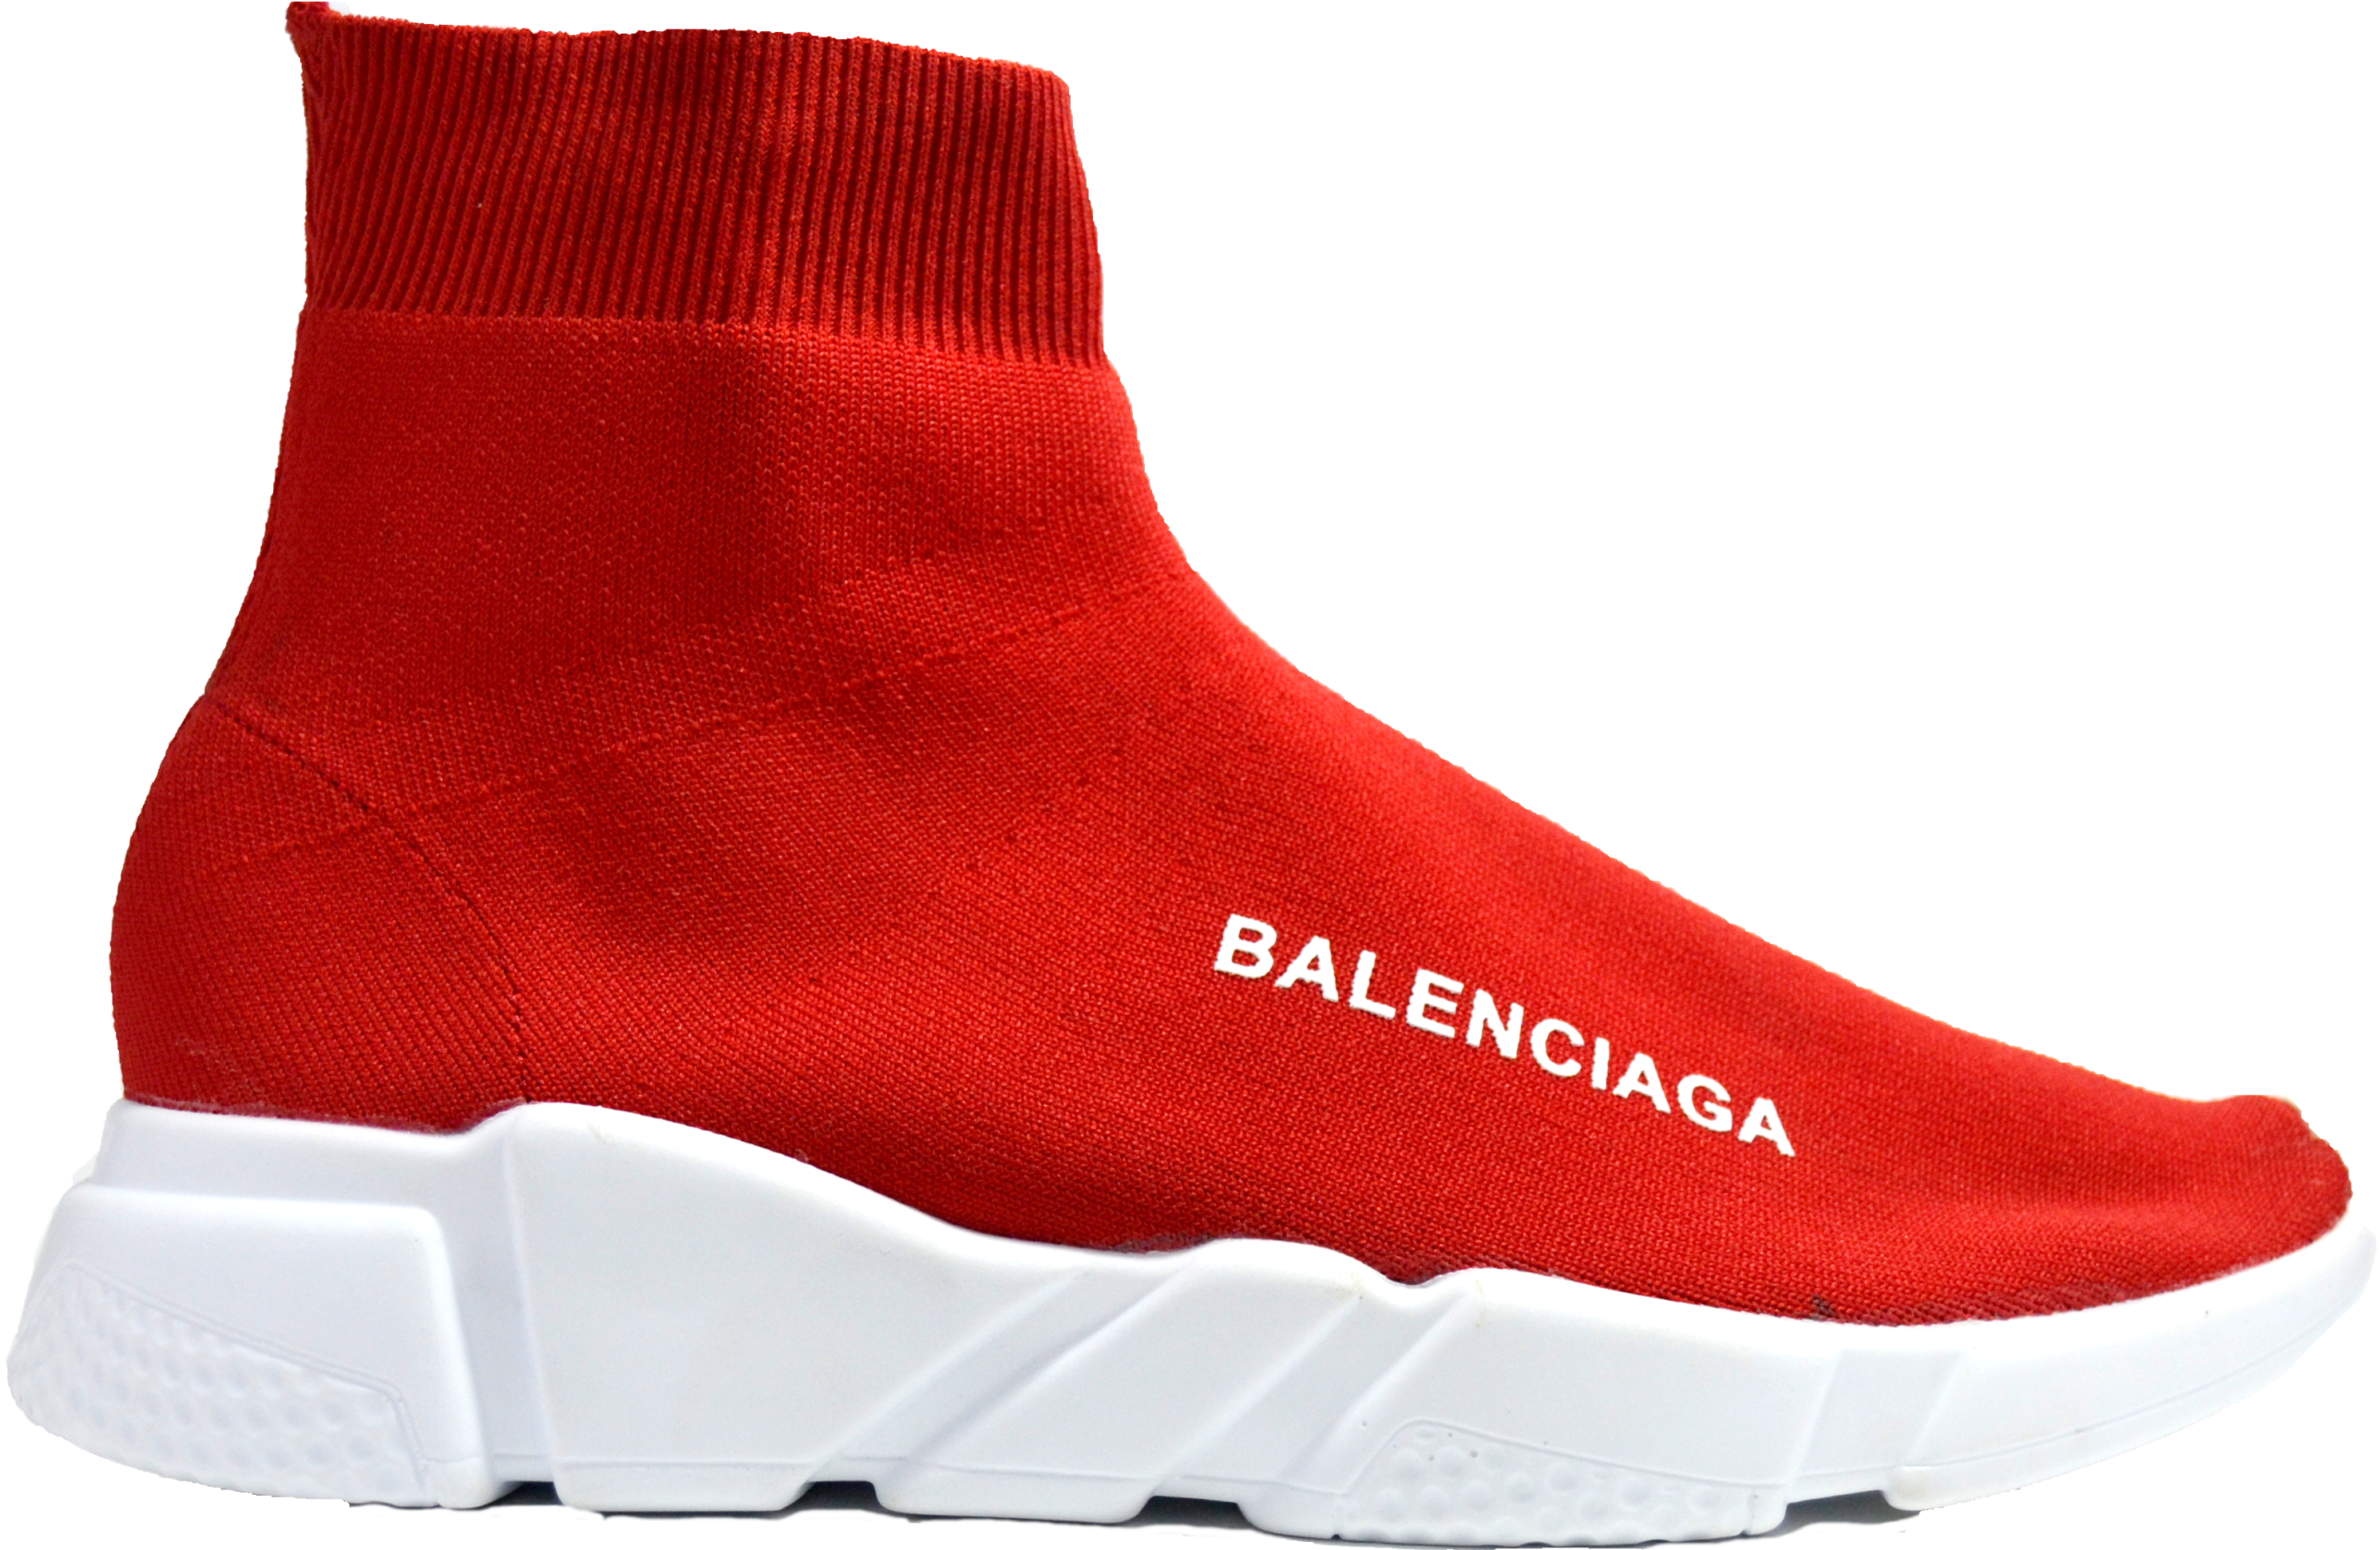 Gym Shoes Clipart Shoe Sock - Balenciaga Speed Trainer Red (3000x3000)